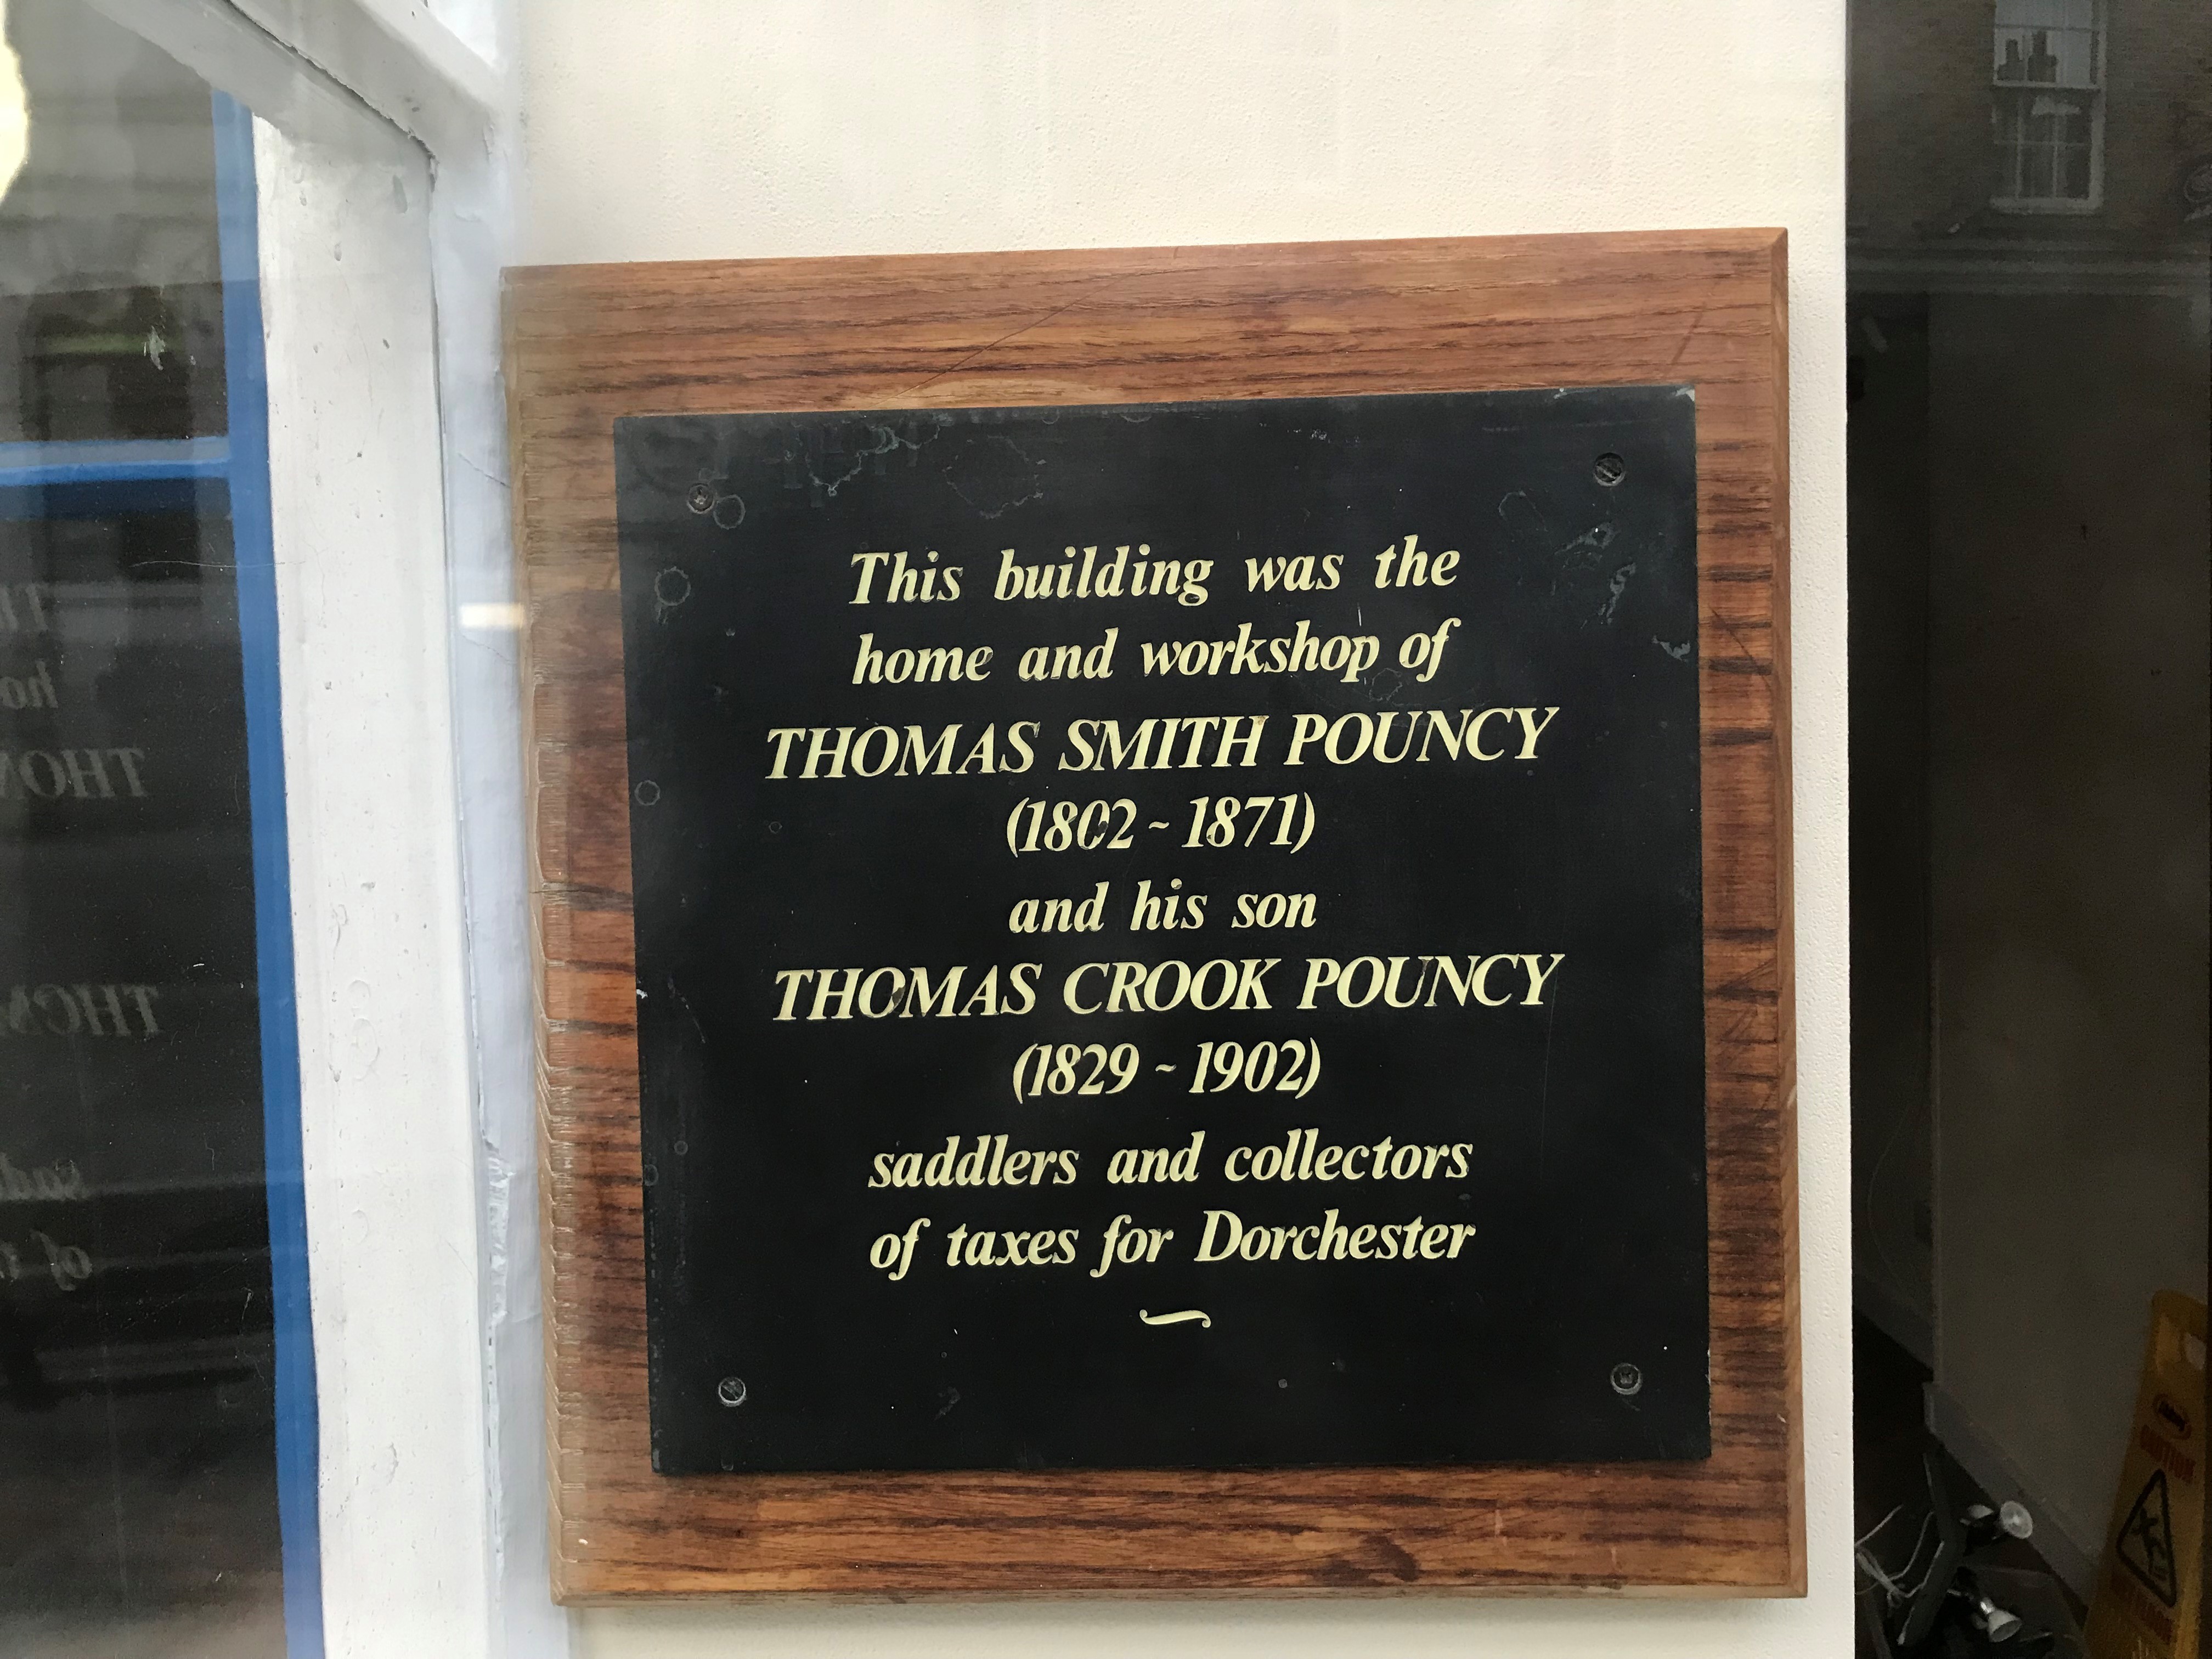 The plaque to the Pouncy family which marks the building’s unusual former uses